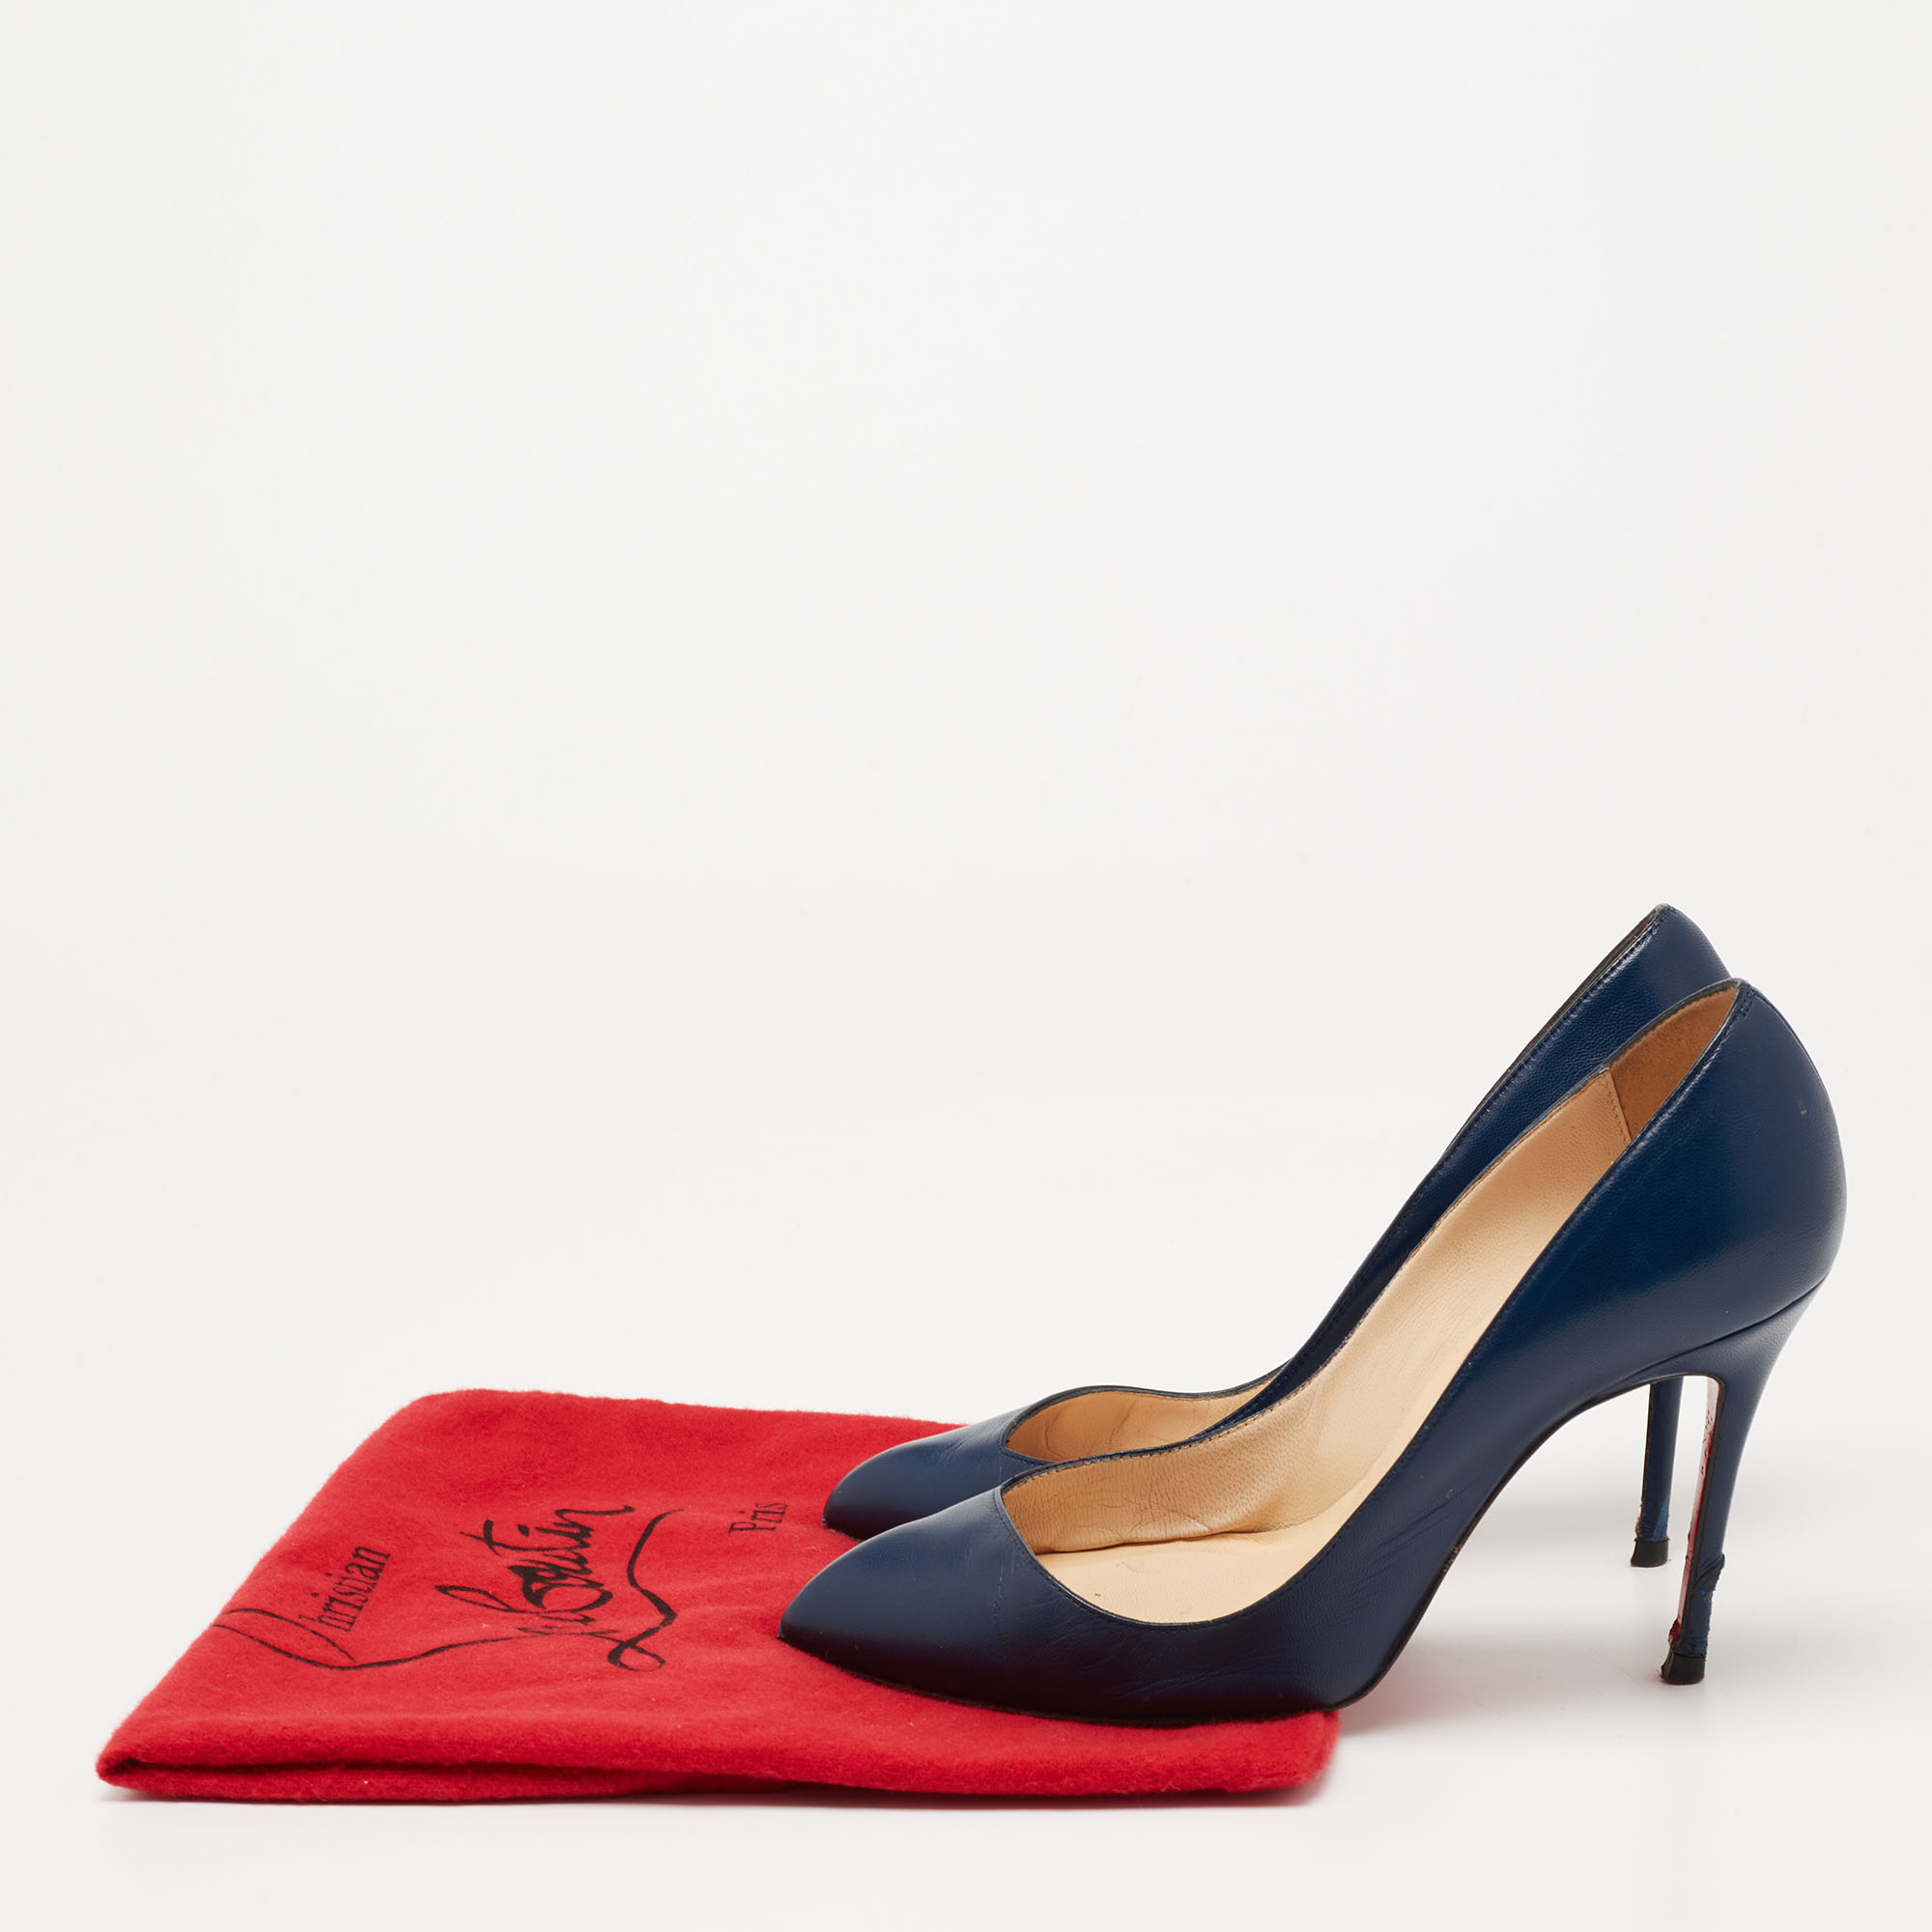 Christian Louboutin Navy Blue Leather Corneille Pointed Toe Pumps Size 35